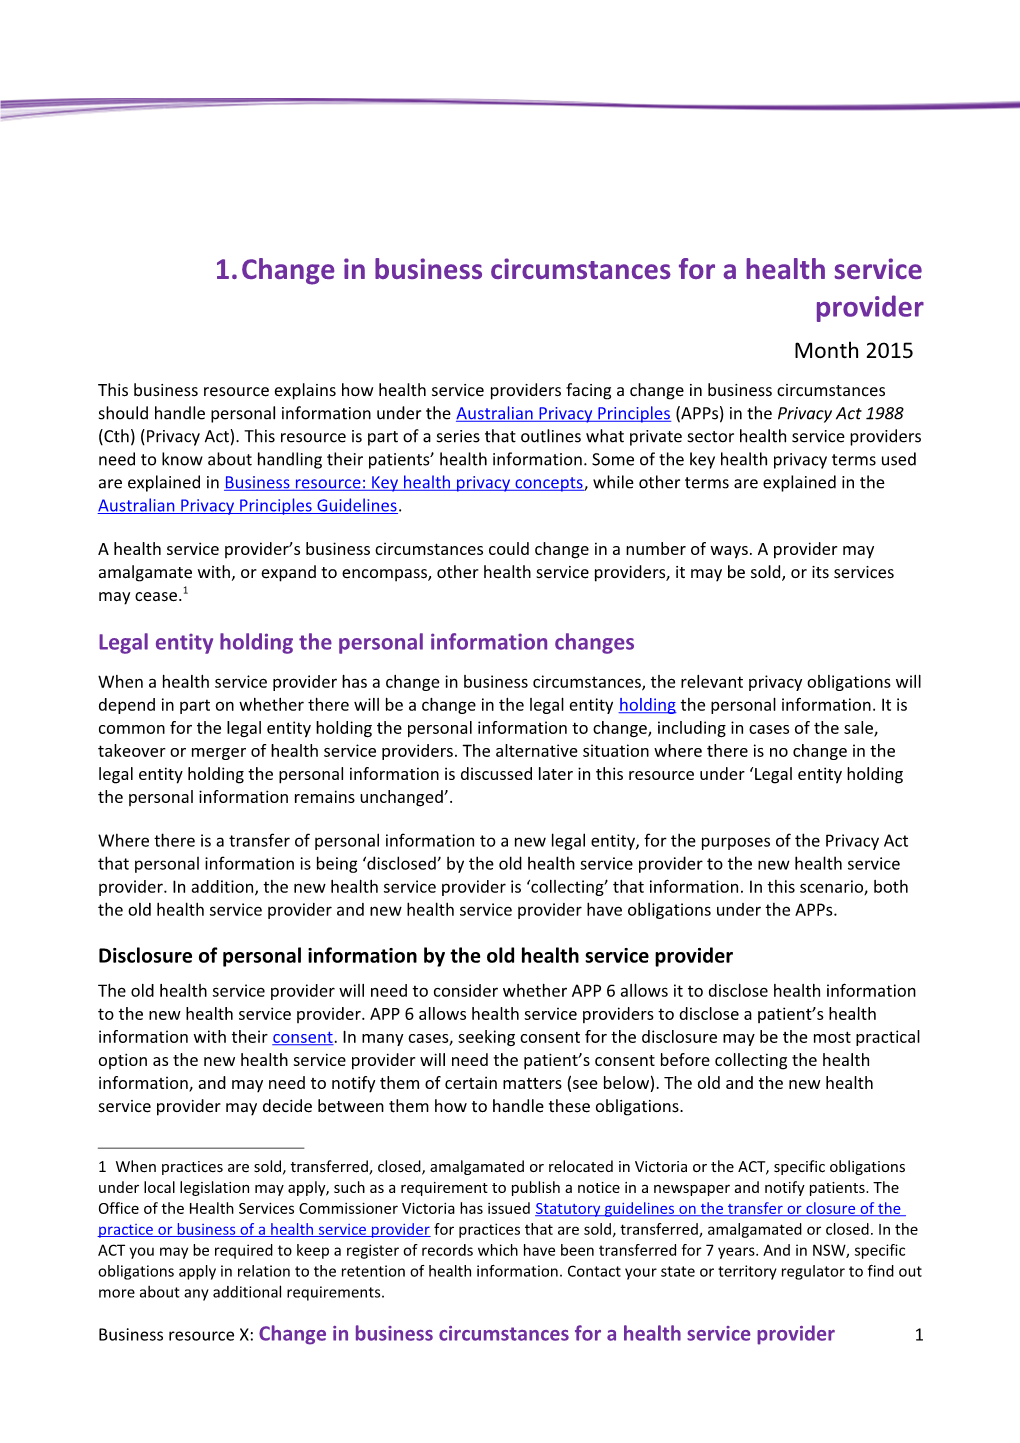 Change in Business Circumstances for a Health Service Provider